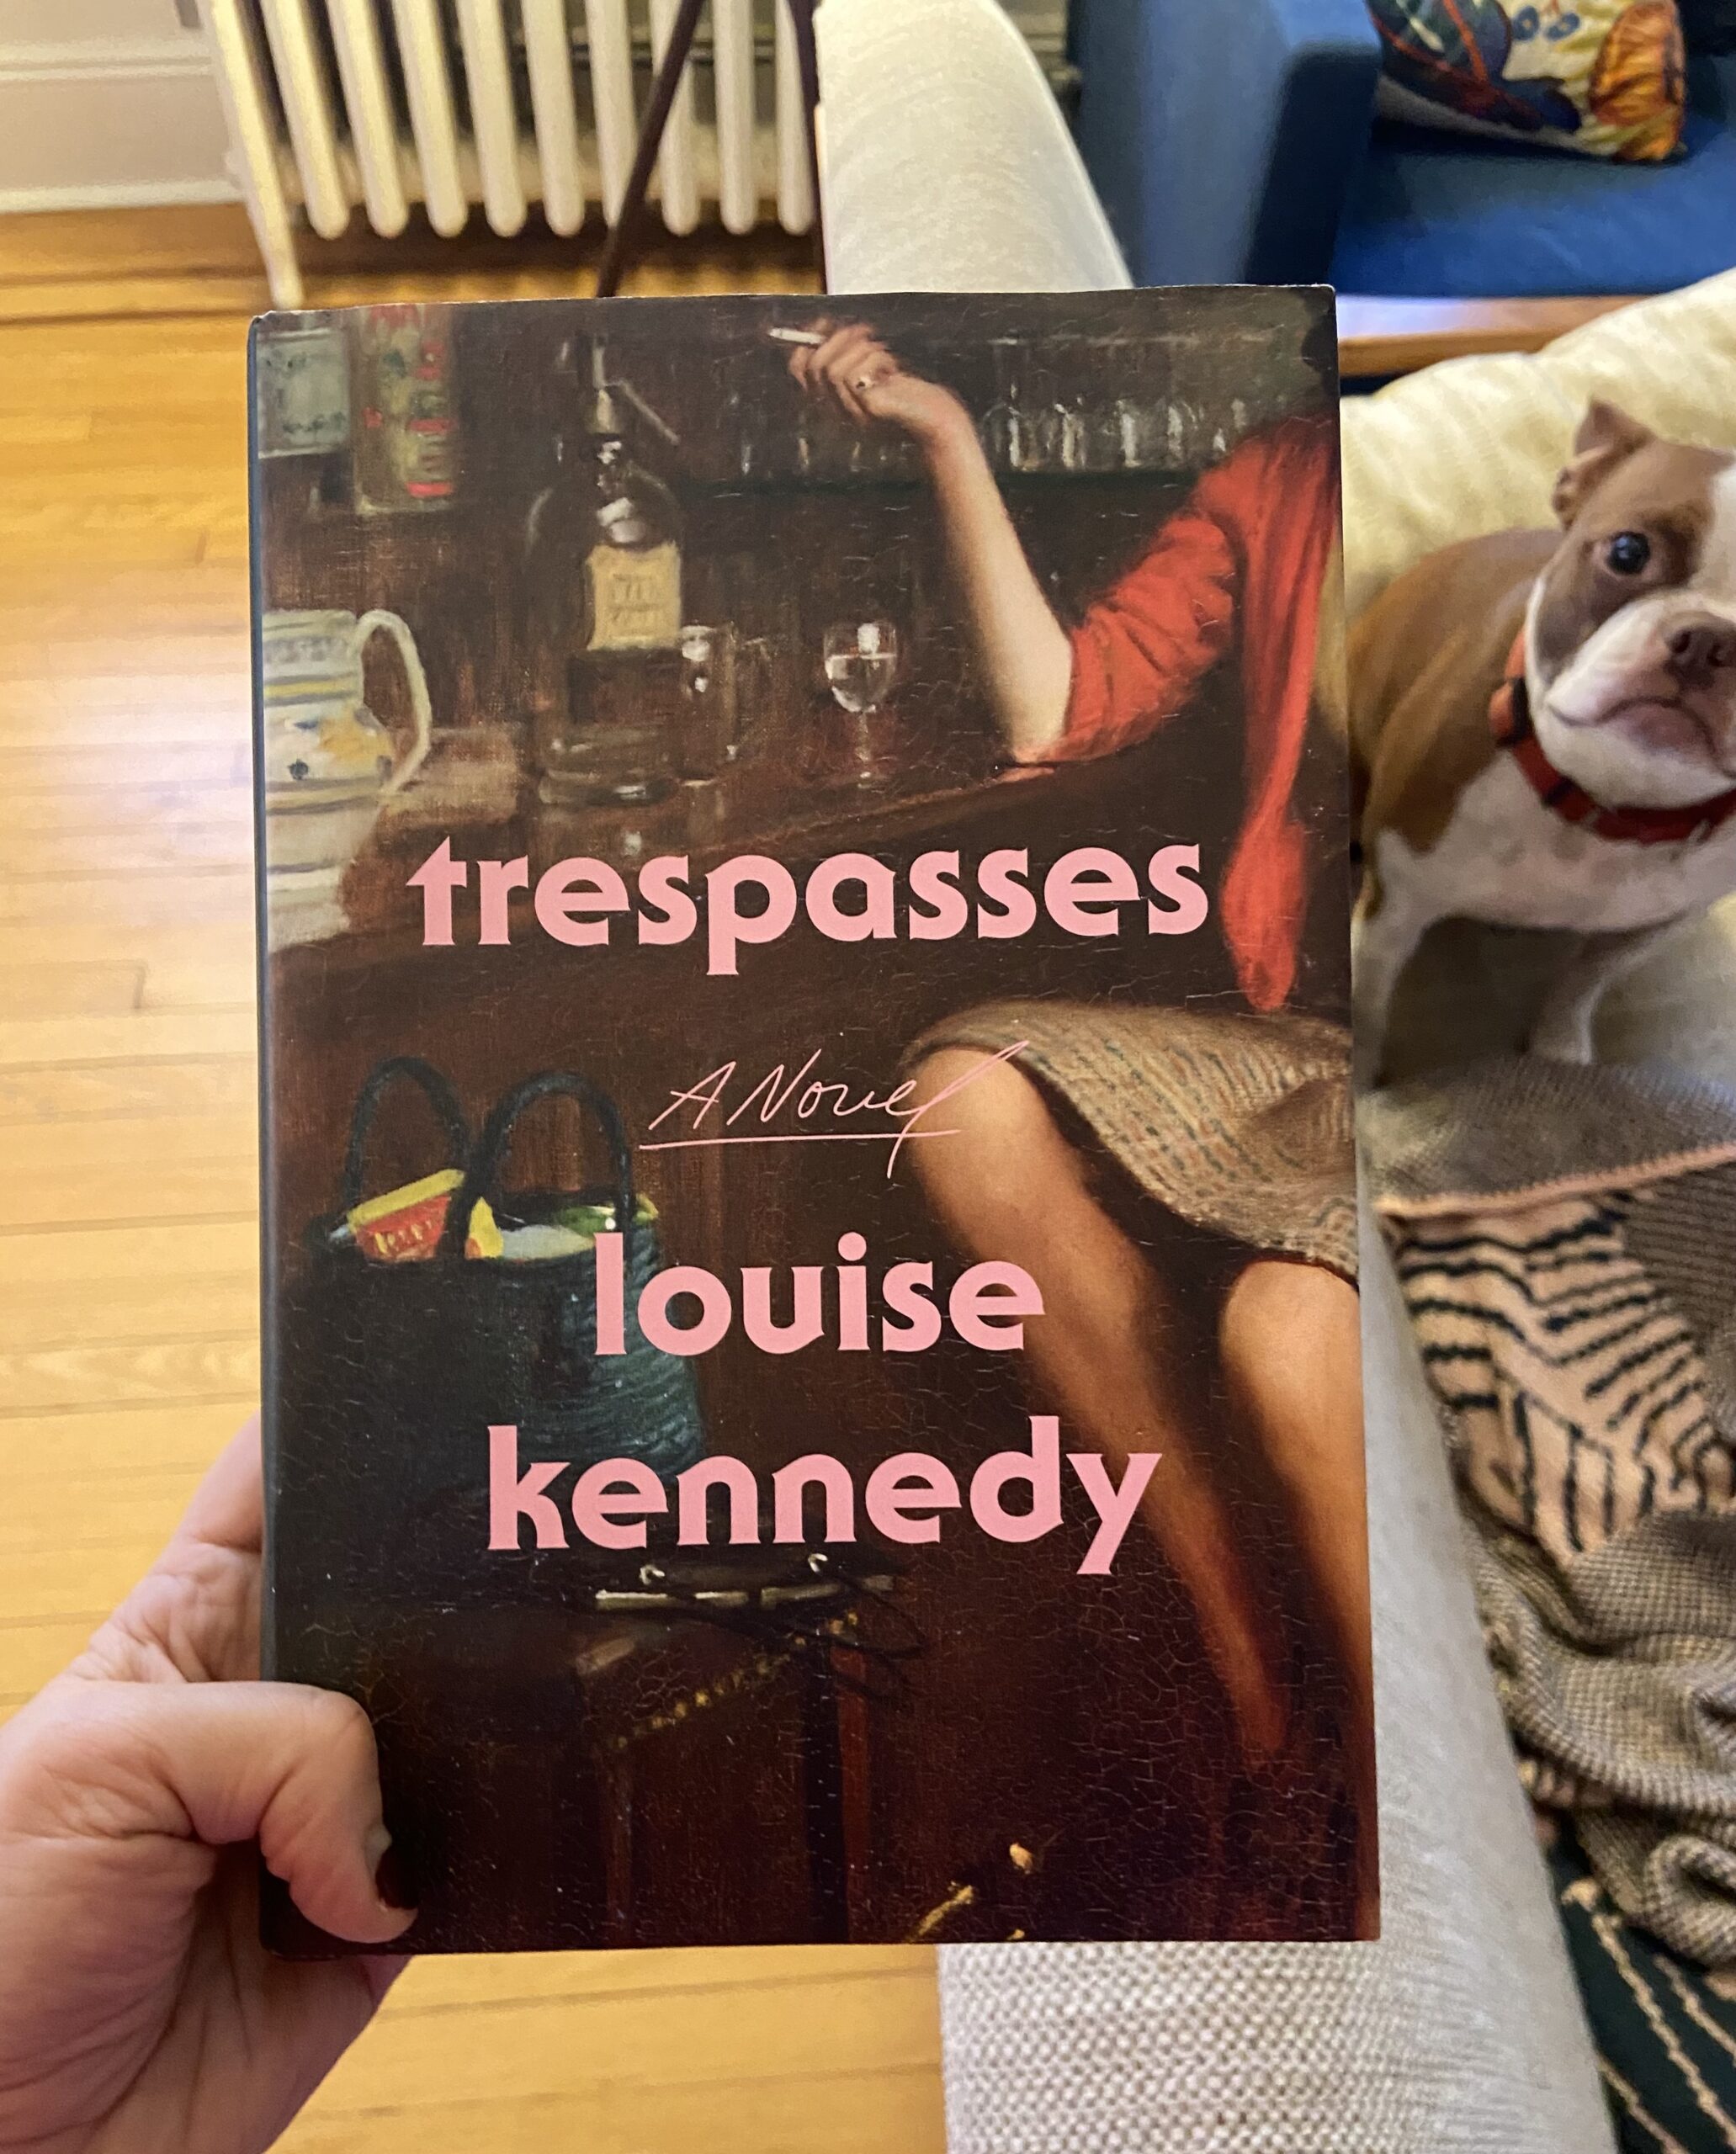 trespasses by Louise Kennedy